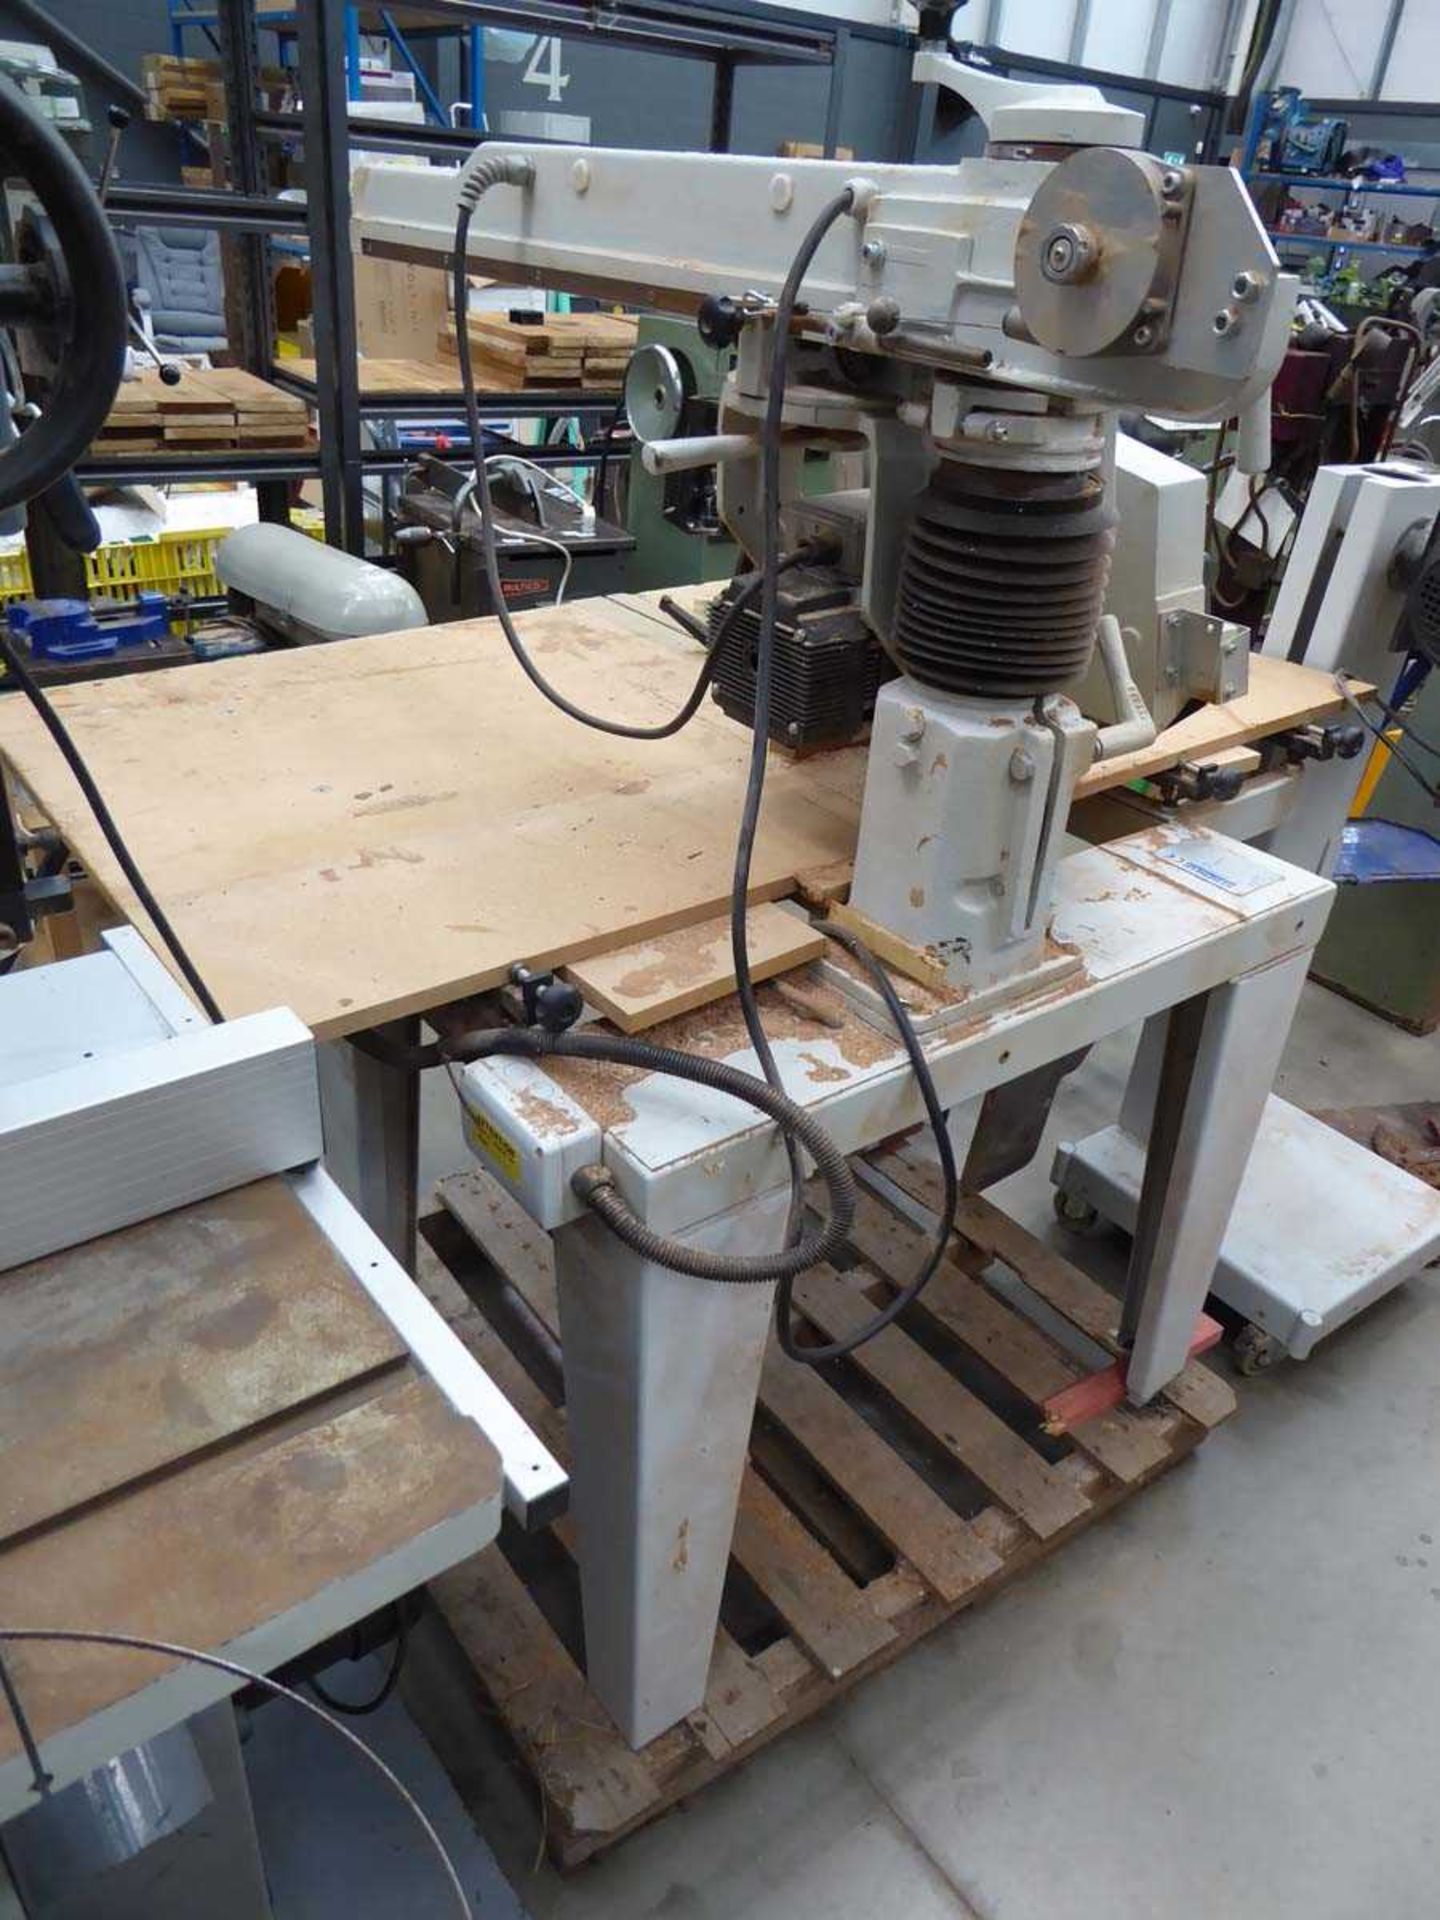 +VAT Stromab RS650 3 phase radial crosscut saw, year 2004 - Image 2 of 3